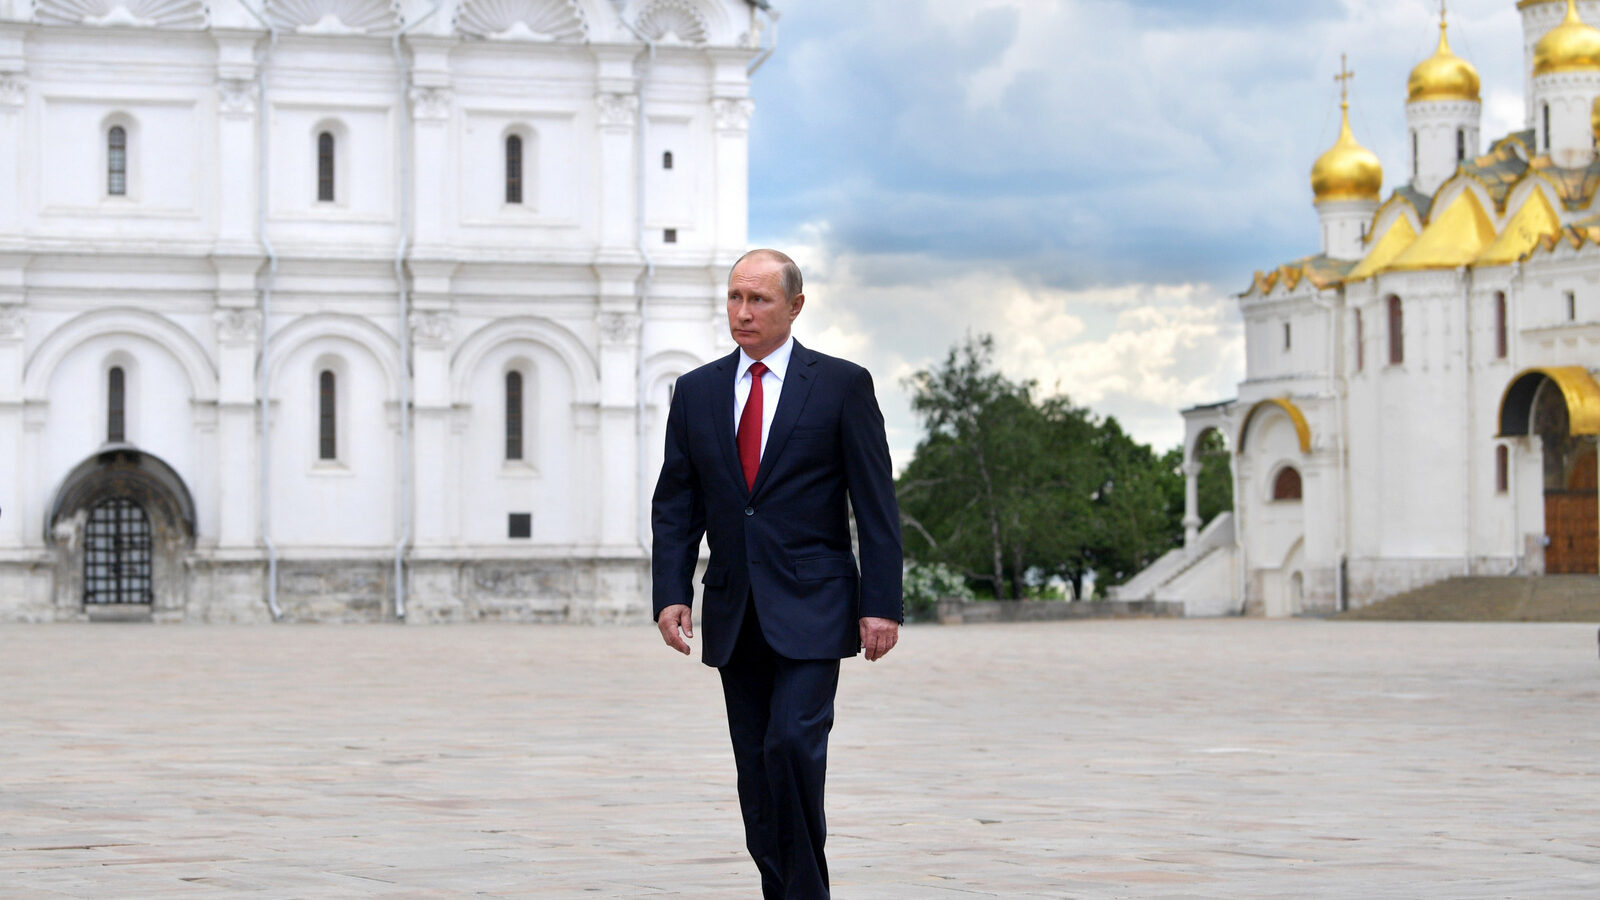 Russian President Vladimir Putin walks along the Cathedral Square of the Kremlin, to take part in a holiday reception in Moscow, Monday, June 12, 2017. (Alexei Druzhinin/Sputnik)